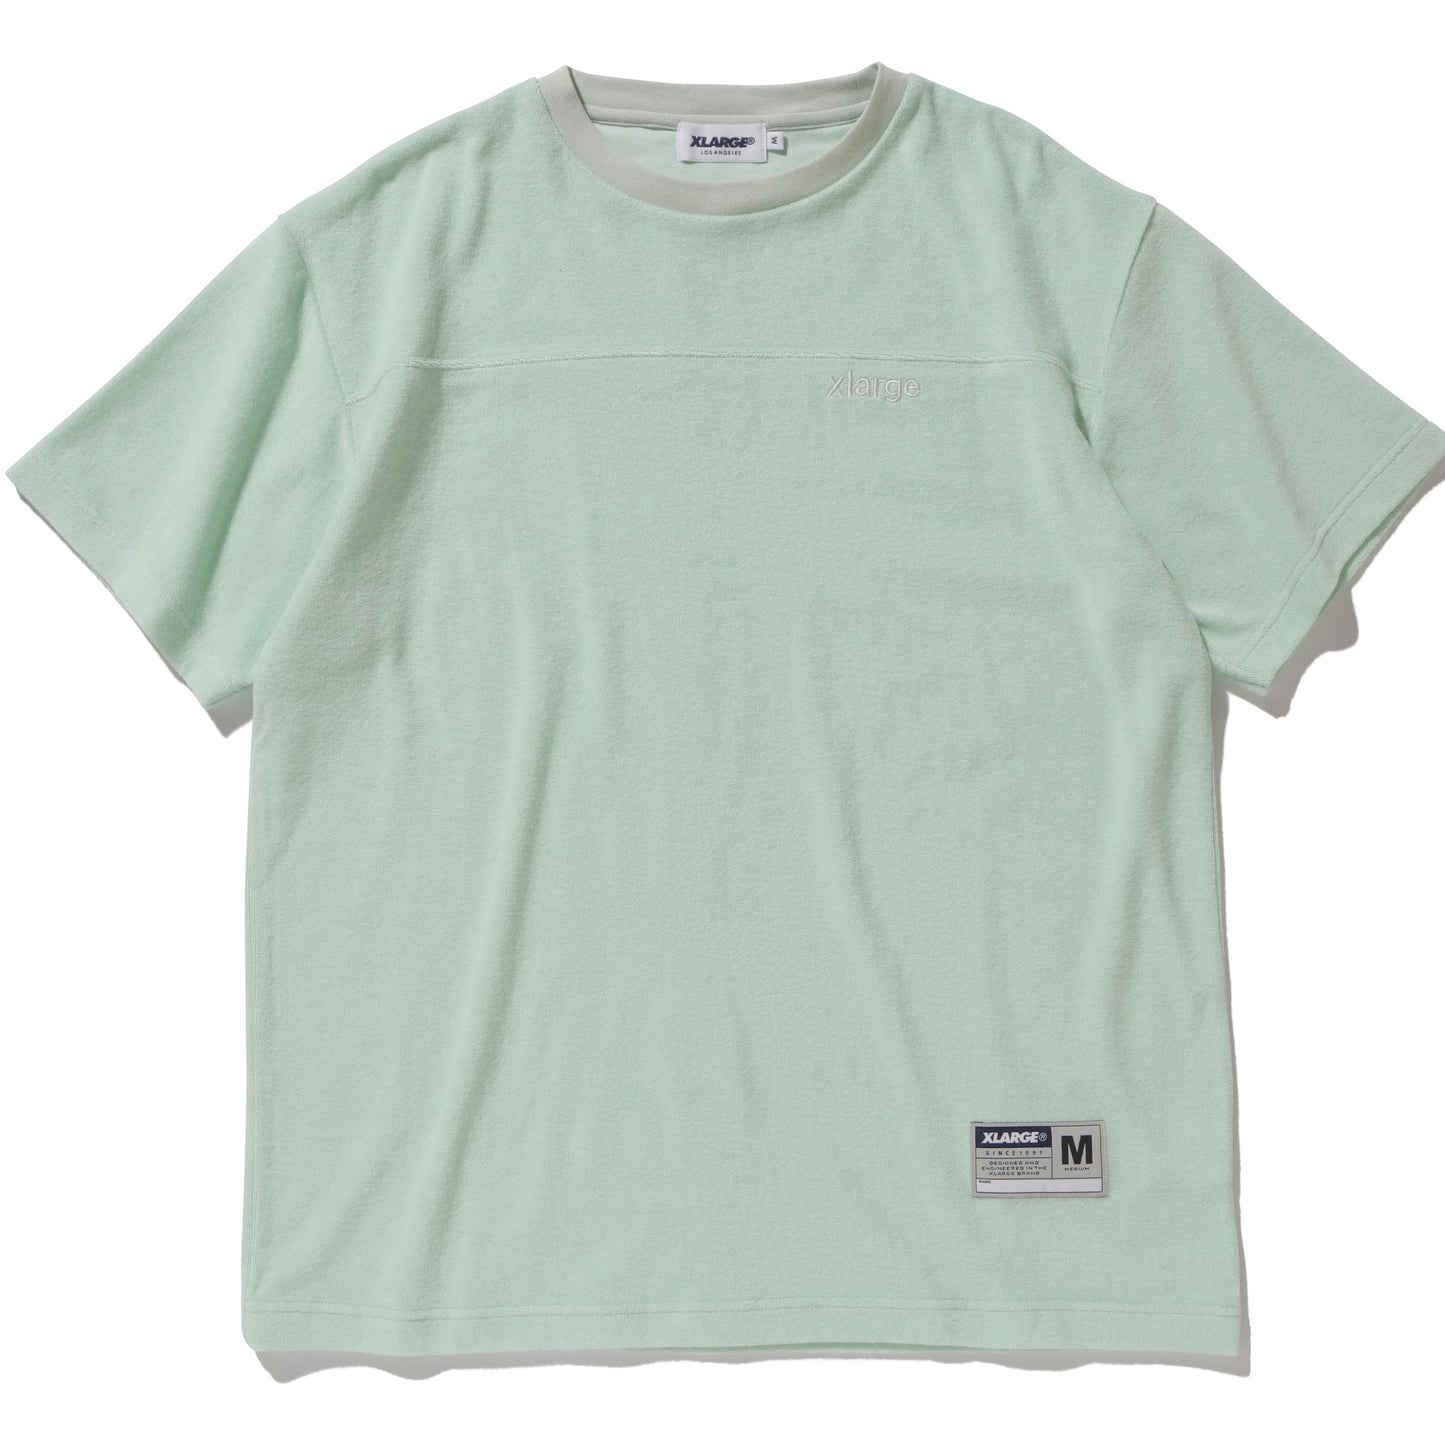 TERRY FOOTBALL S/S SHIRT KNITS XLARGE  